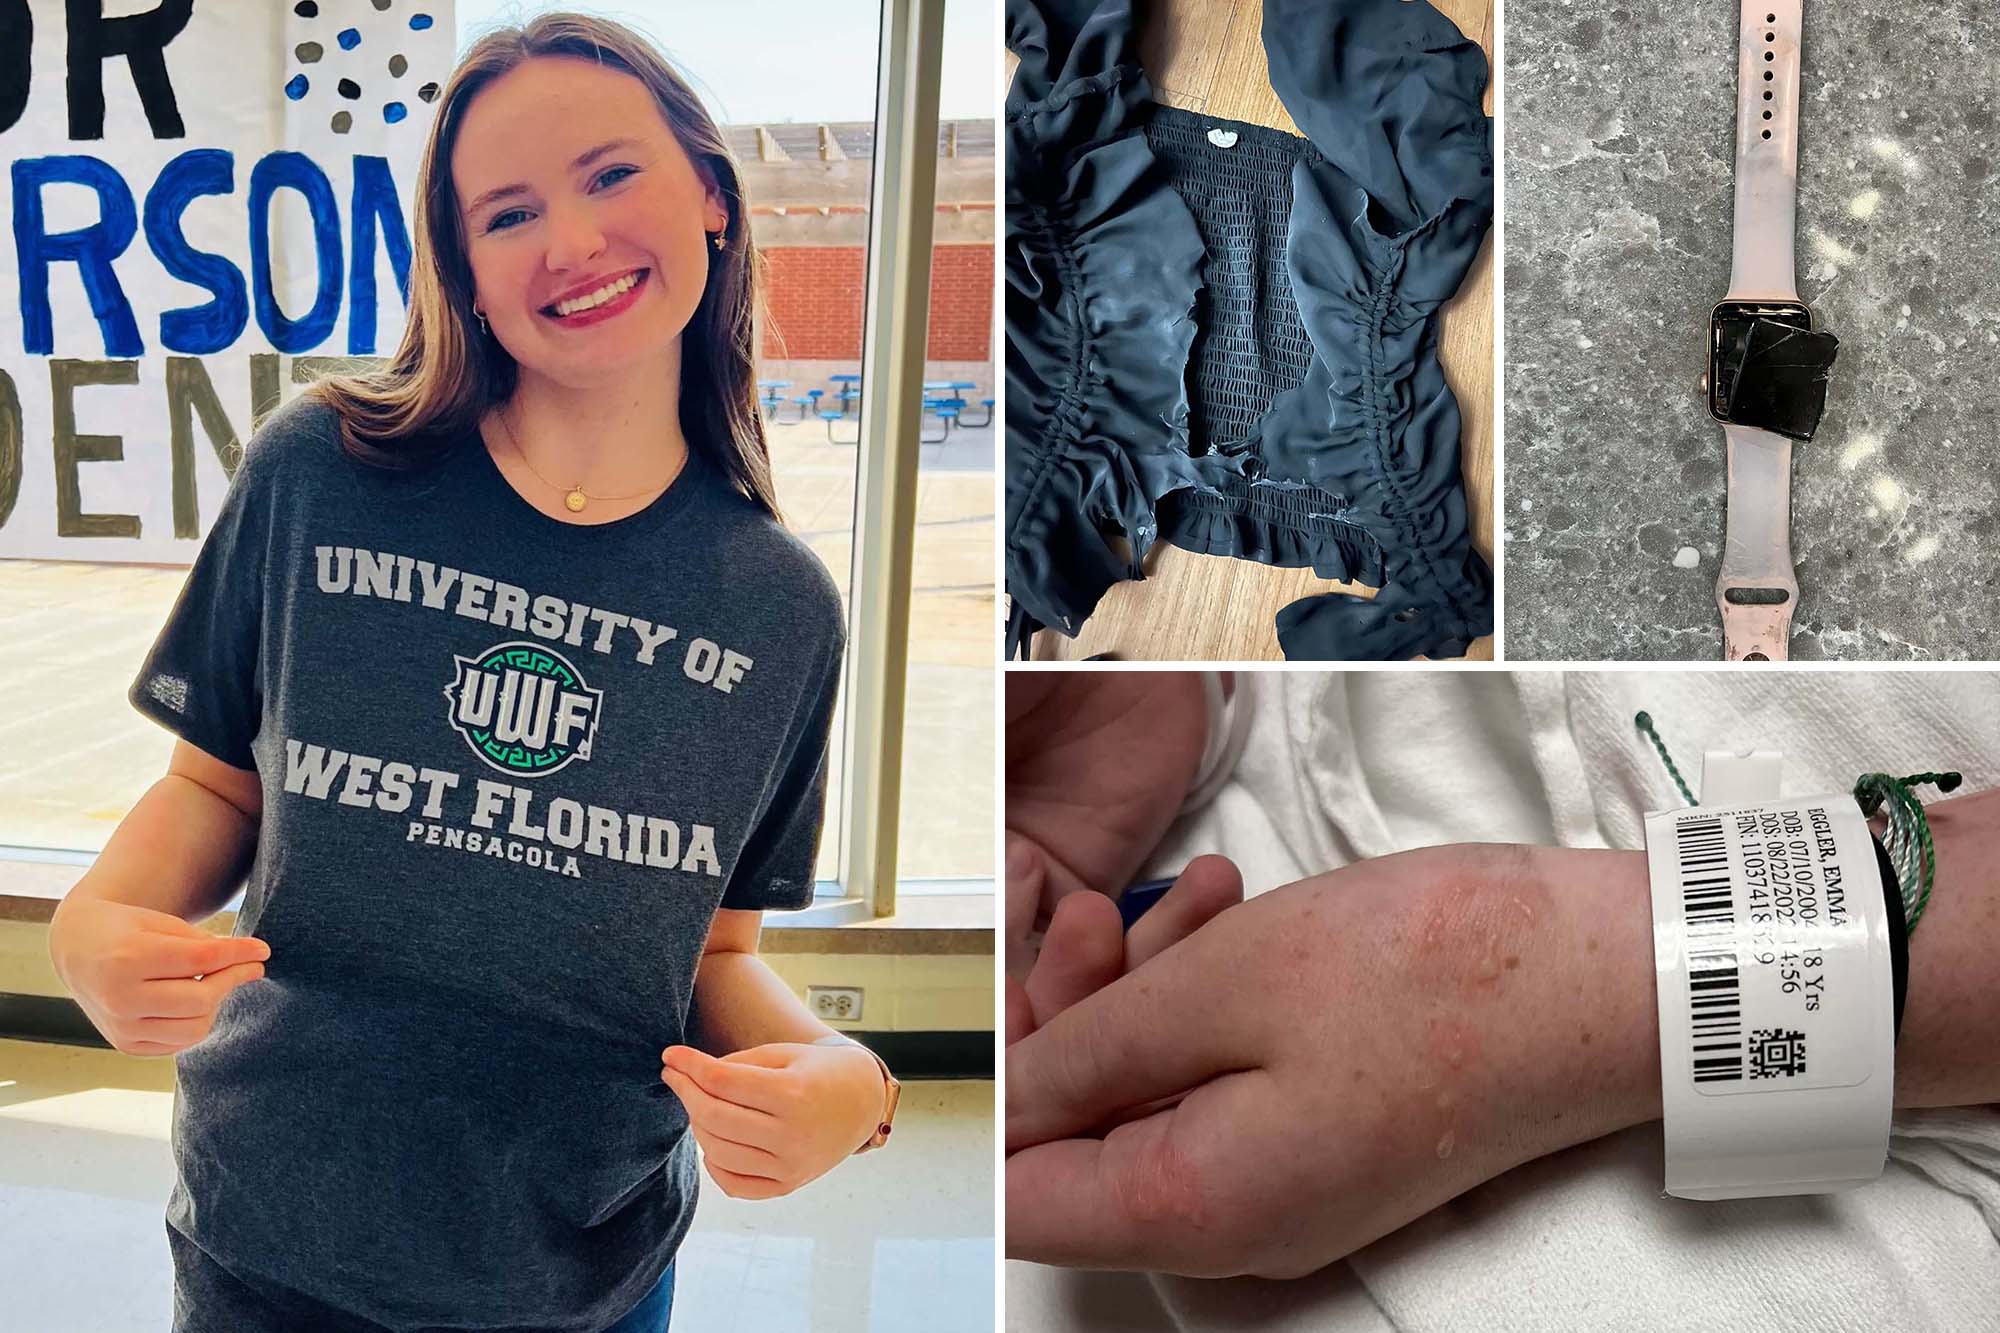 Alabama teen Emma Eggler was struck by lightning on her very first day of classes at the University of West Florida.